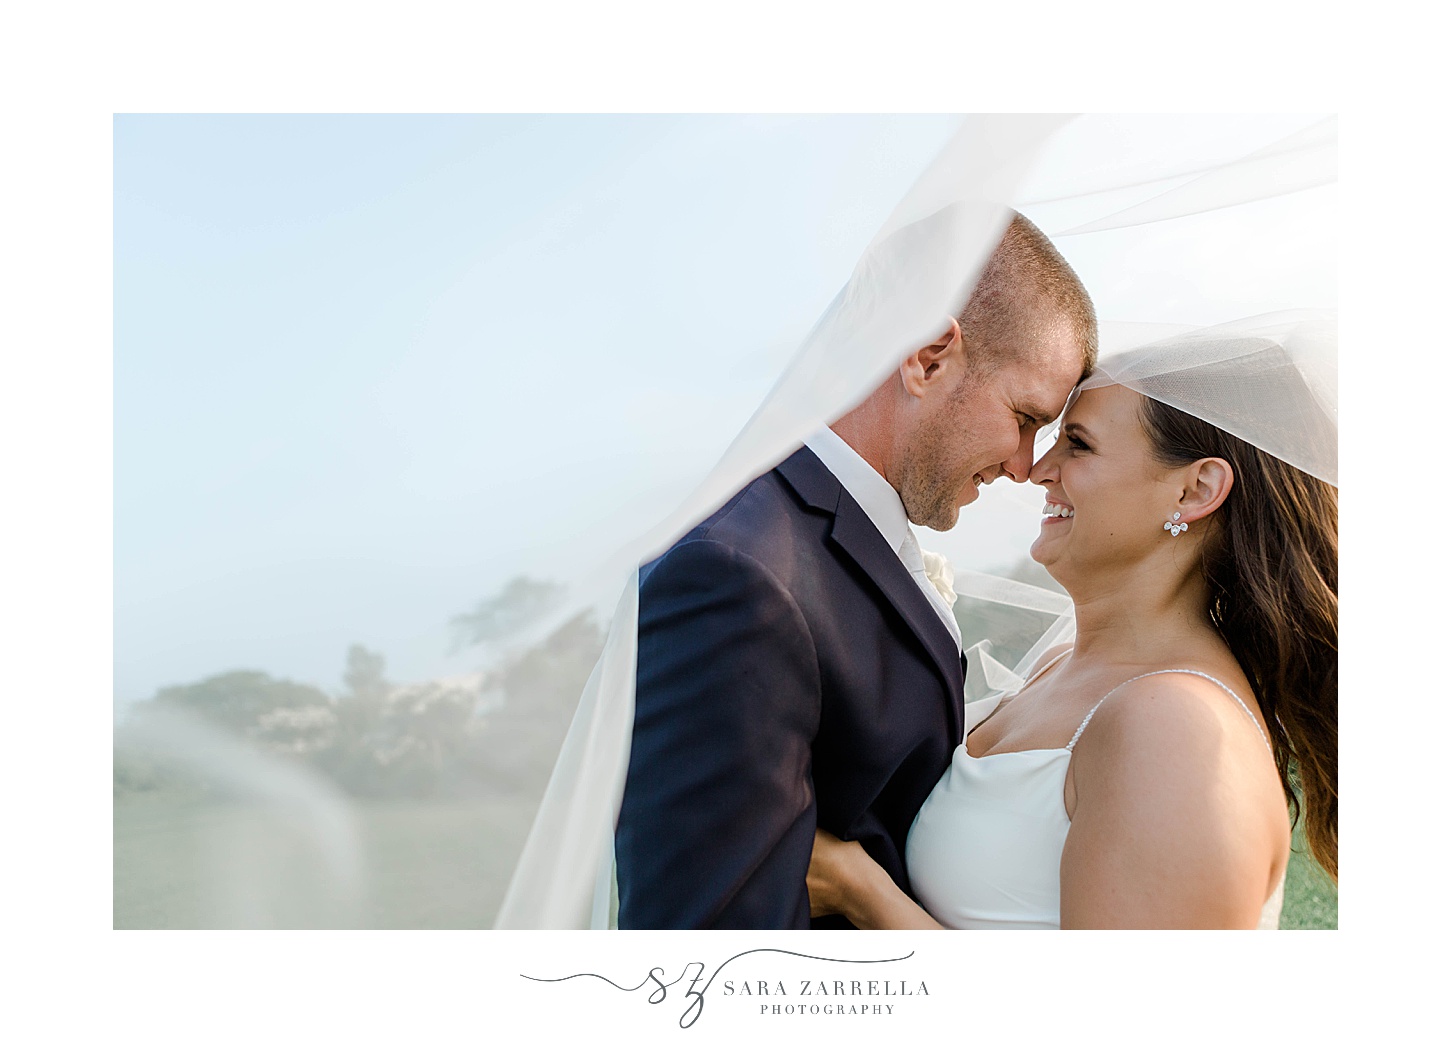 newlyweds lean for a kiss under bride's veil in Newport RI